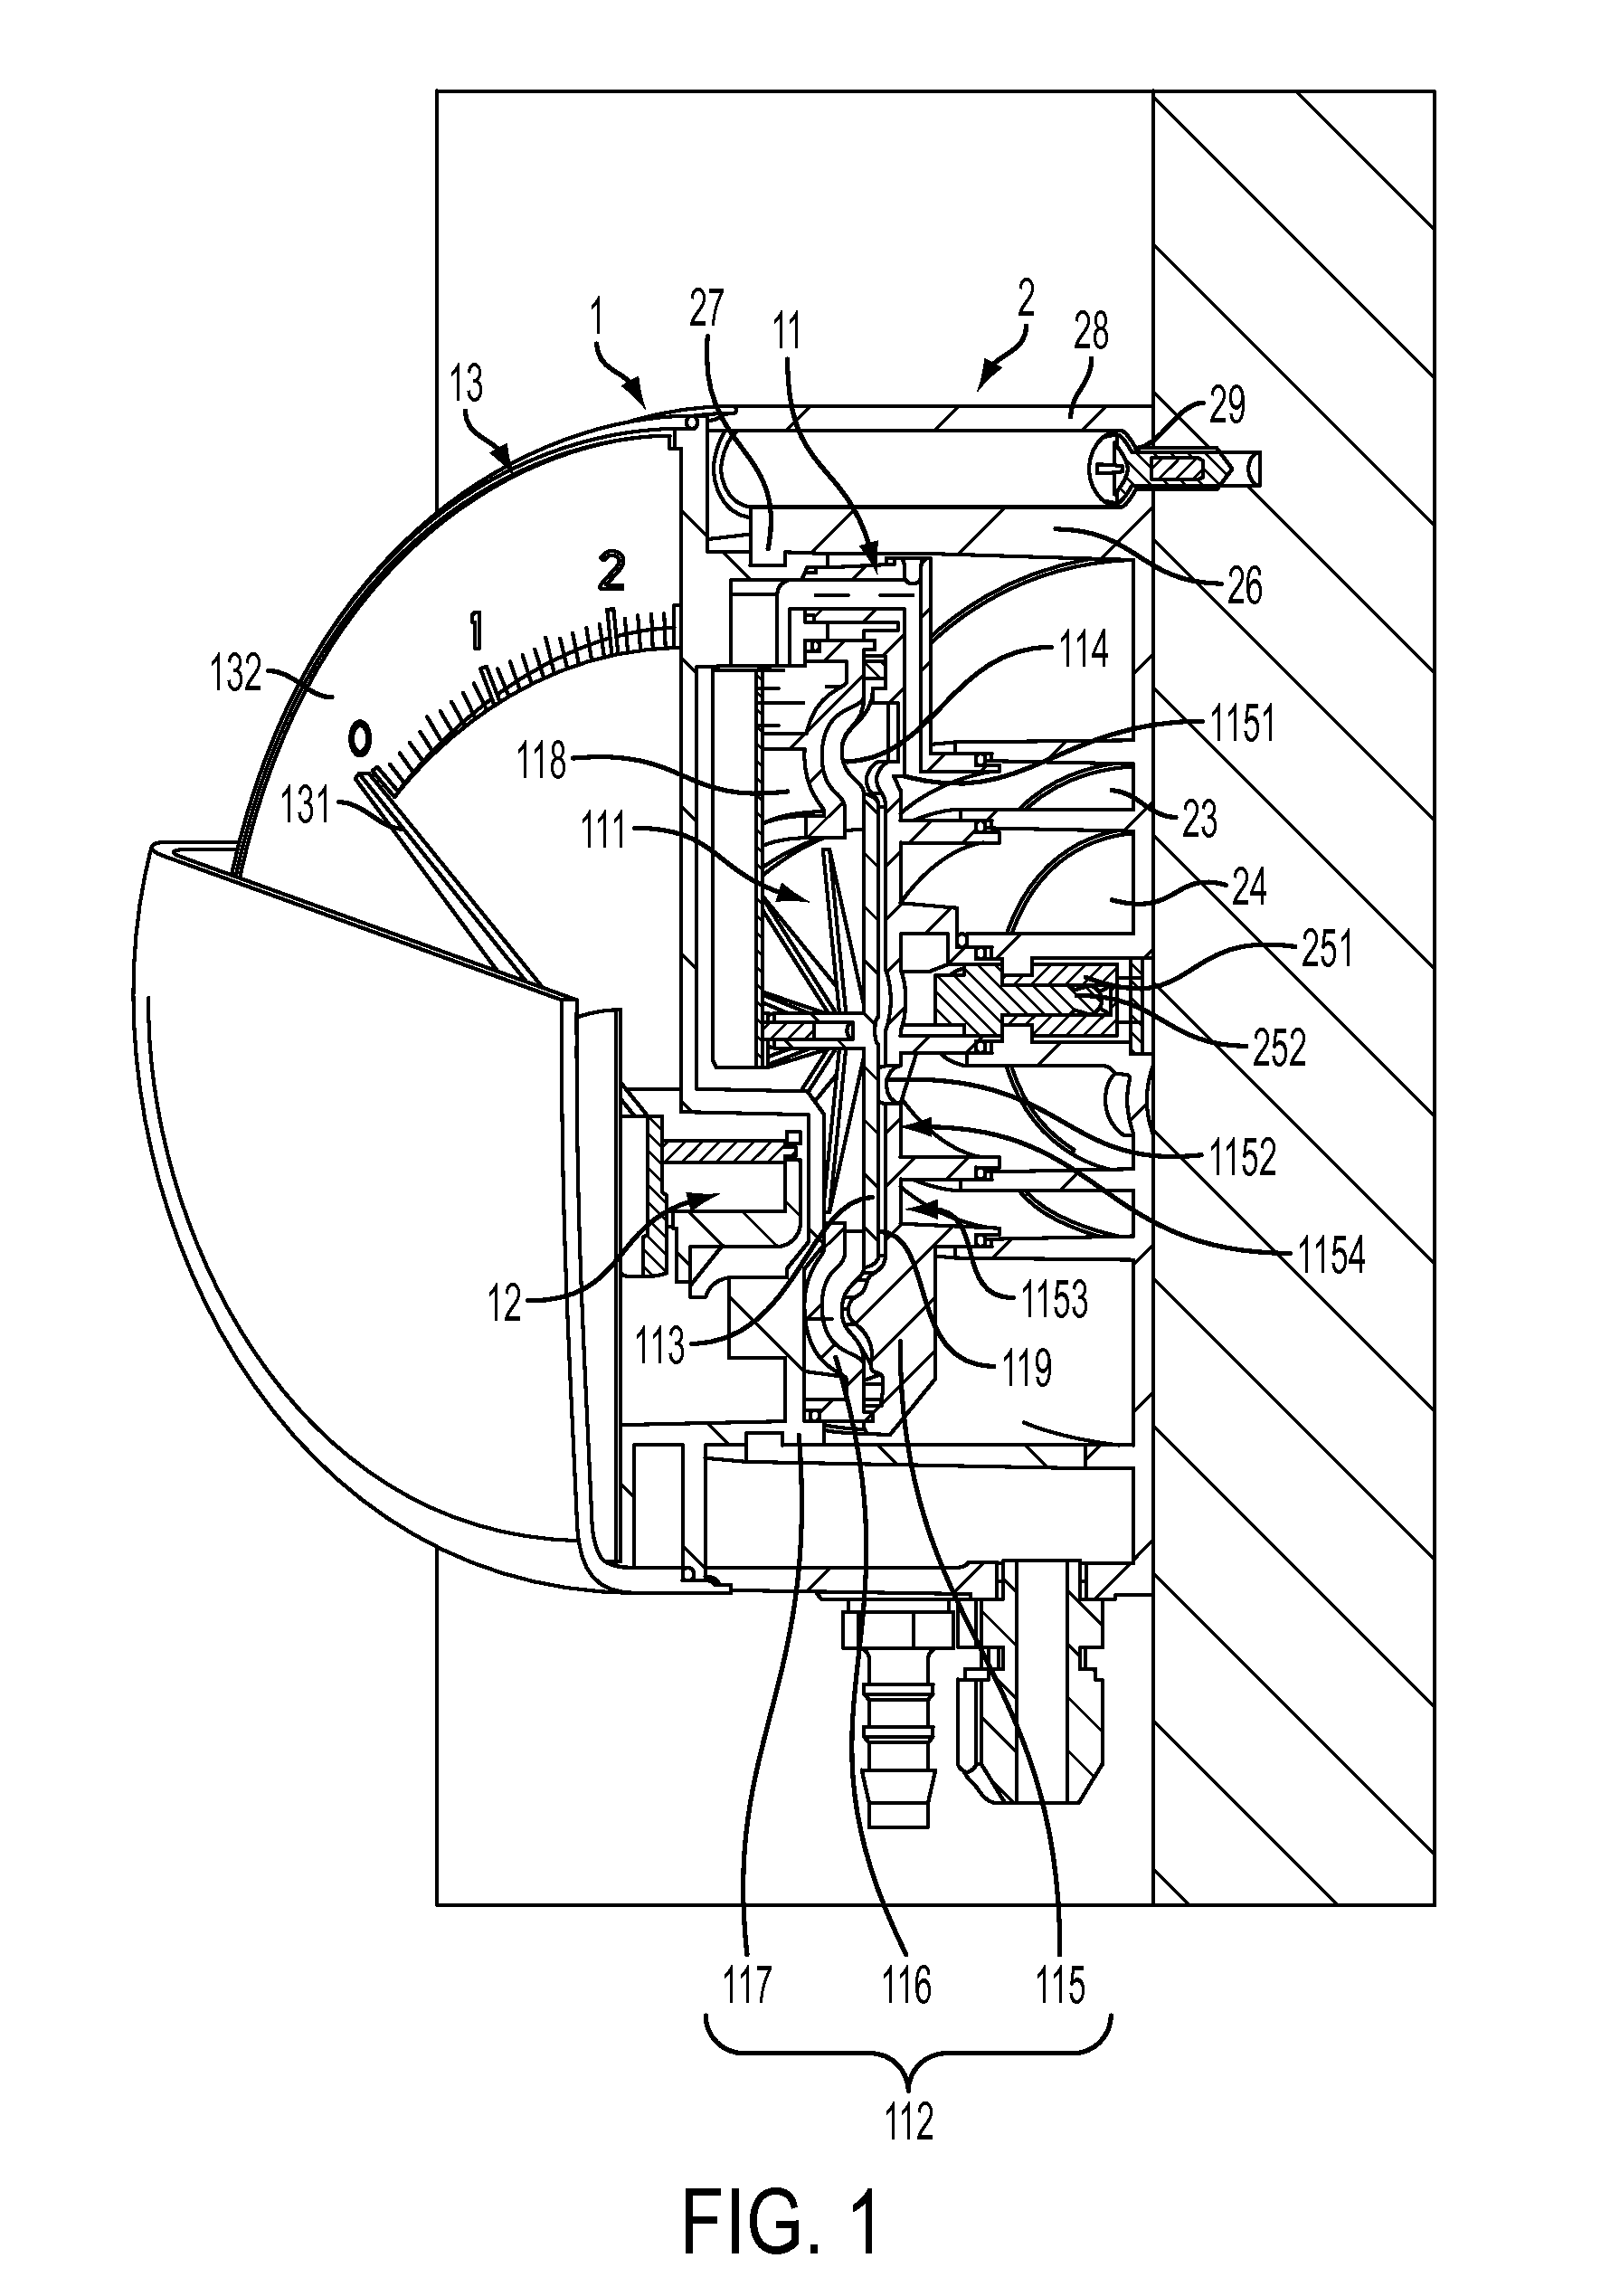 Pressure gauge with pressure gauge assembly and connecting assembly